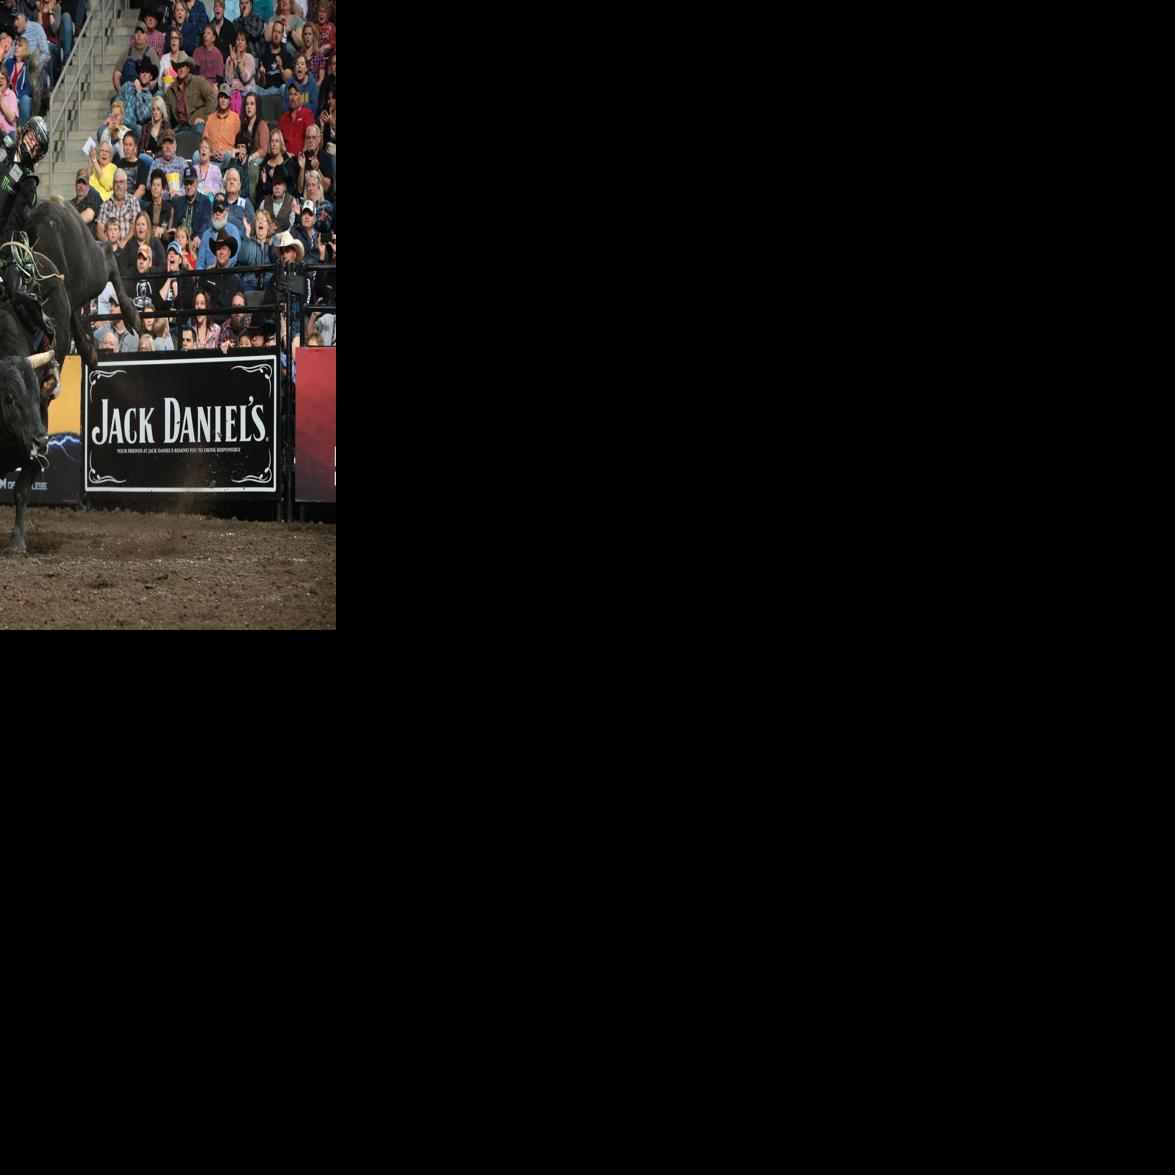 Professional Bull Riders event comes to Nampa Local News